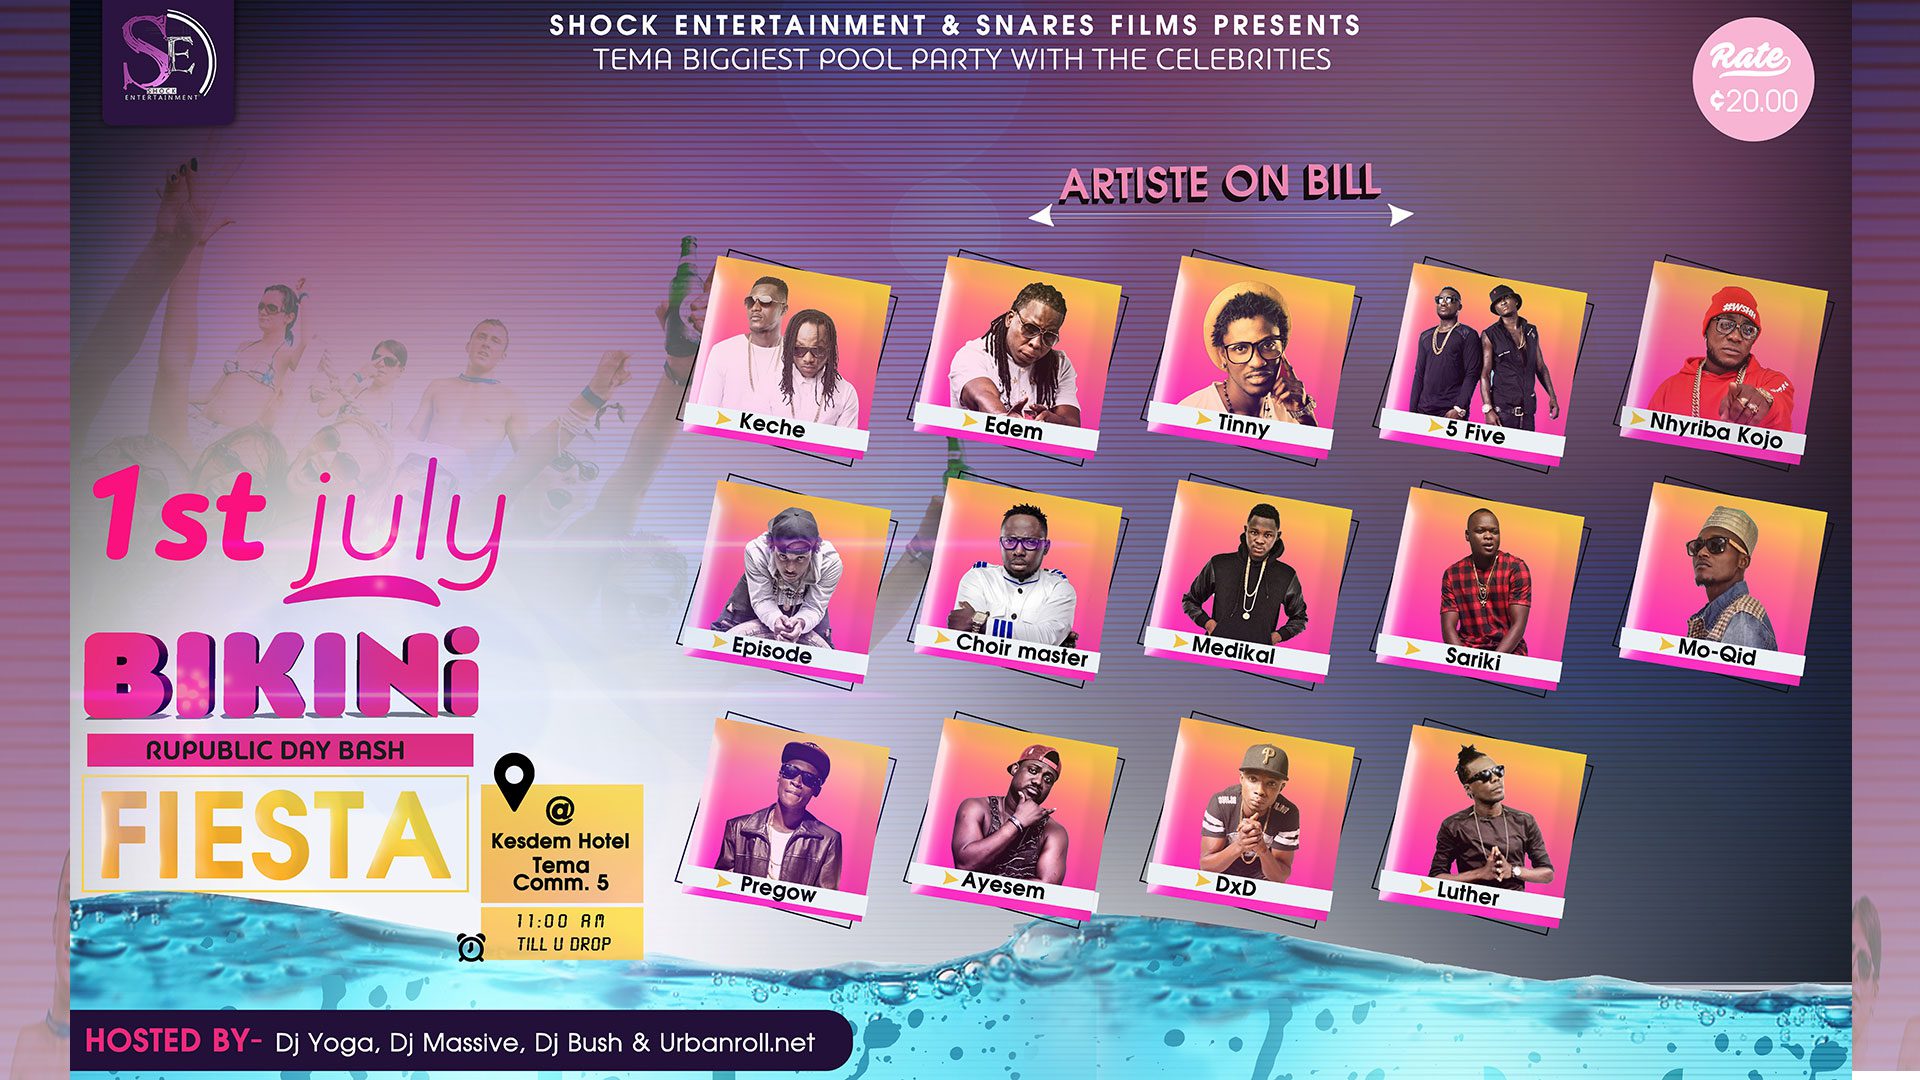 Tinny,Epixode,Edem,Luther and others  for Bikini Fiesta.